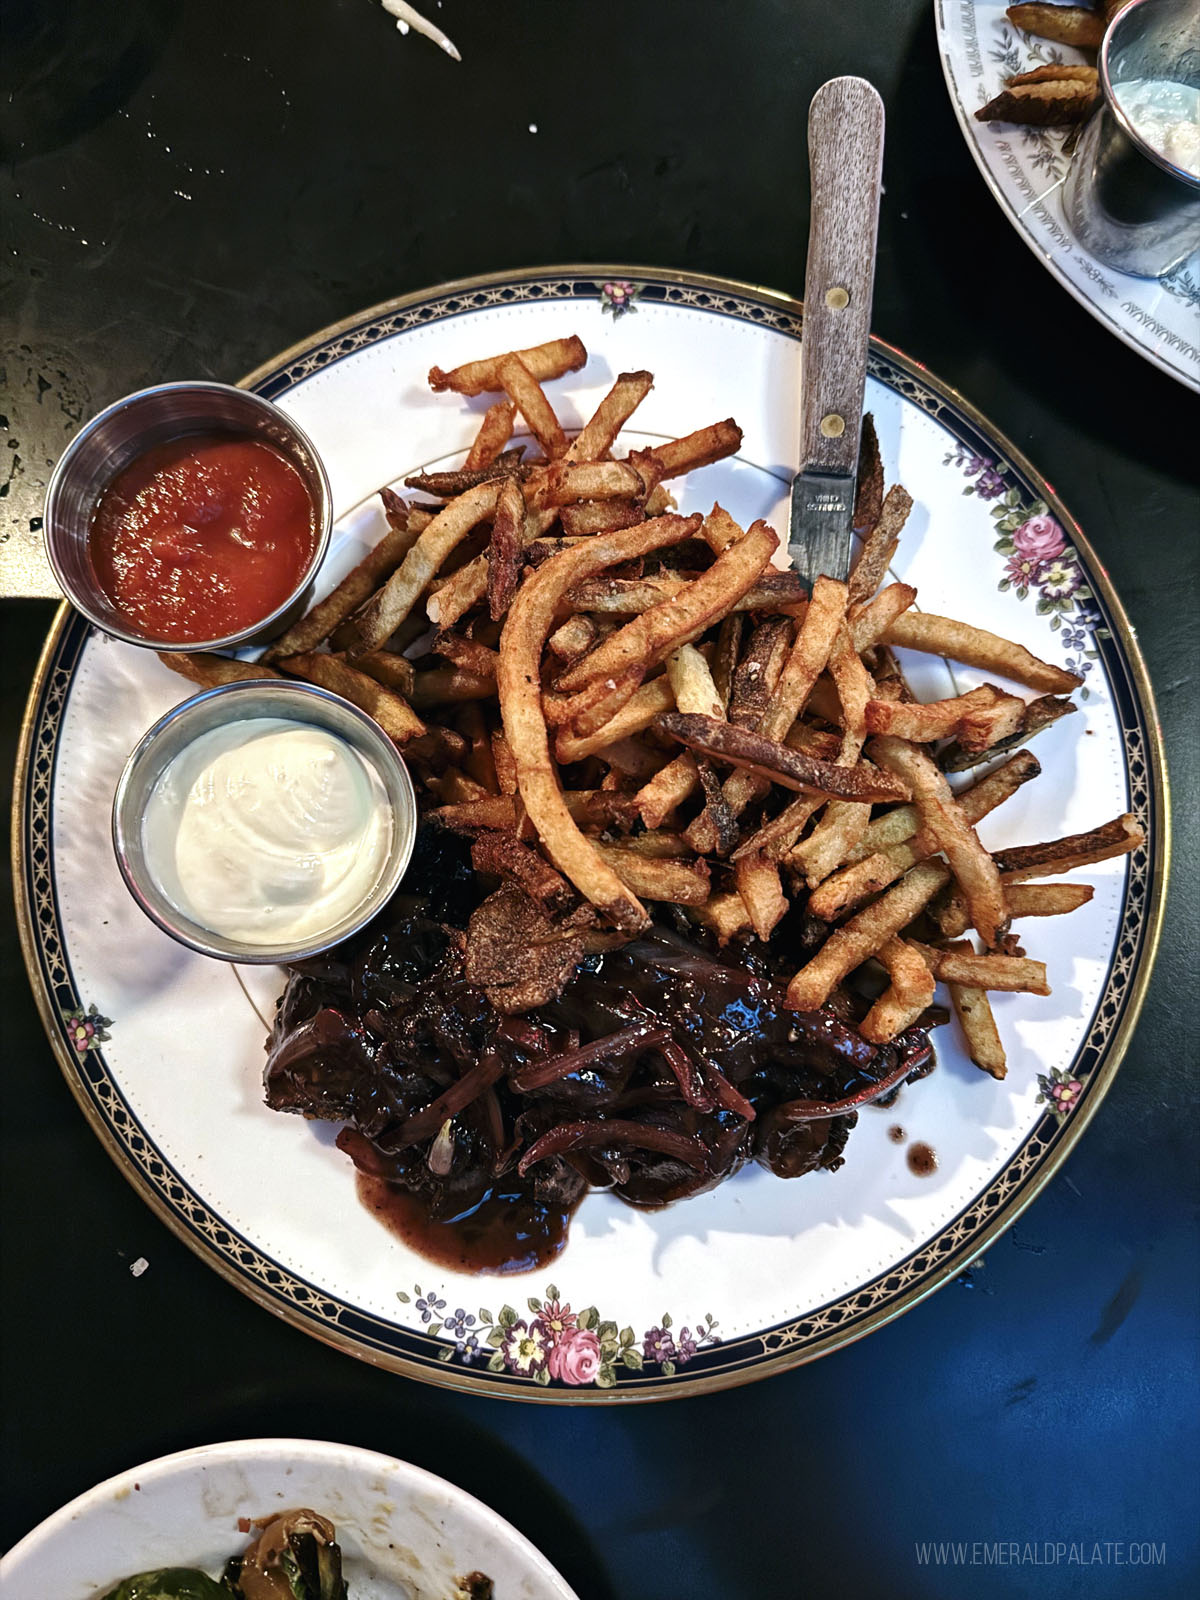 plate of steak and frites